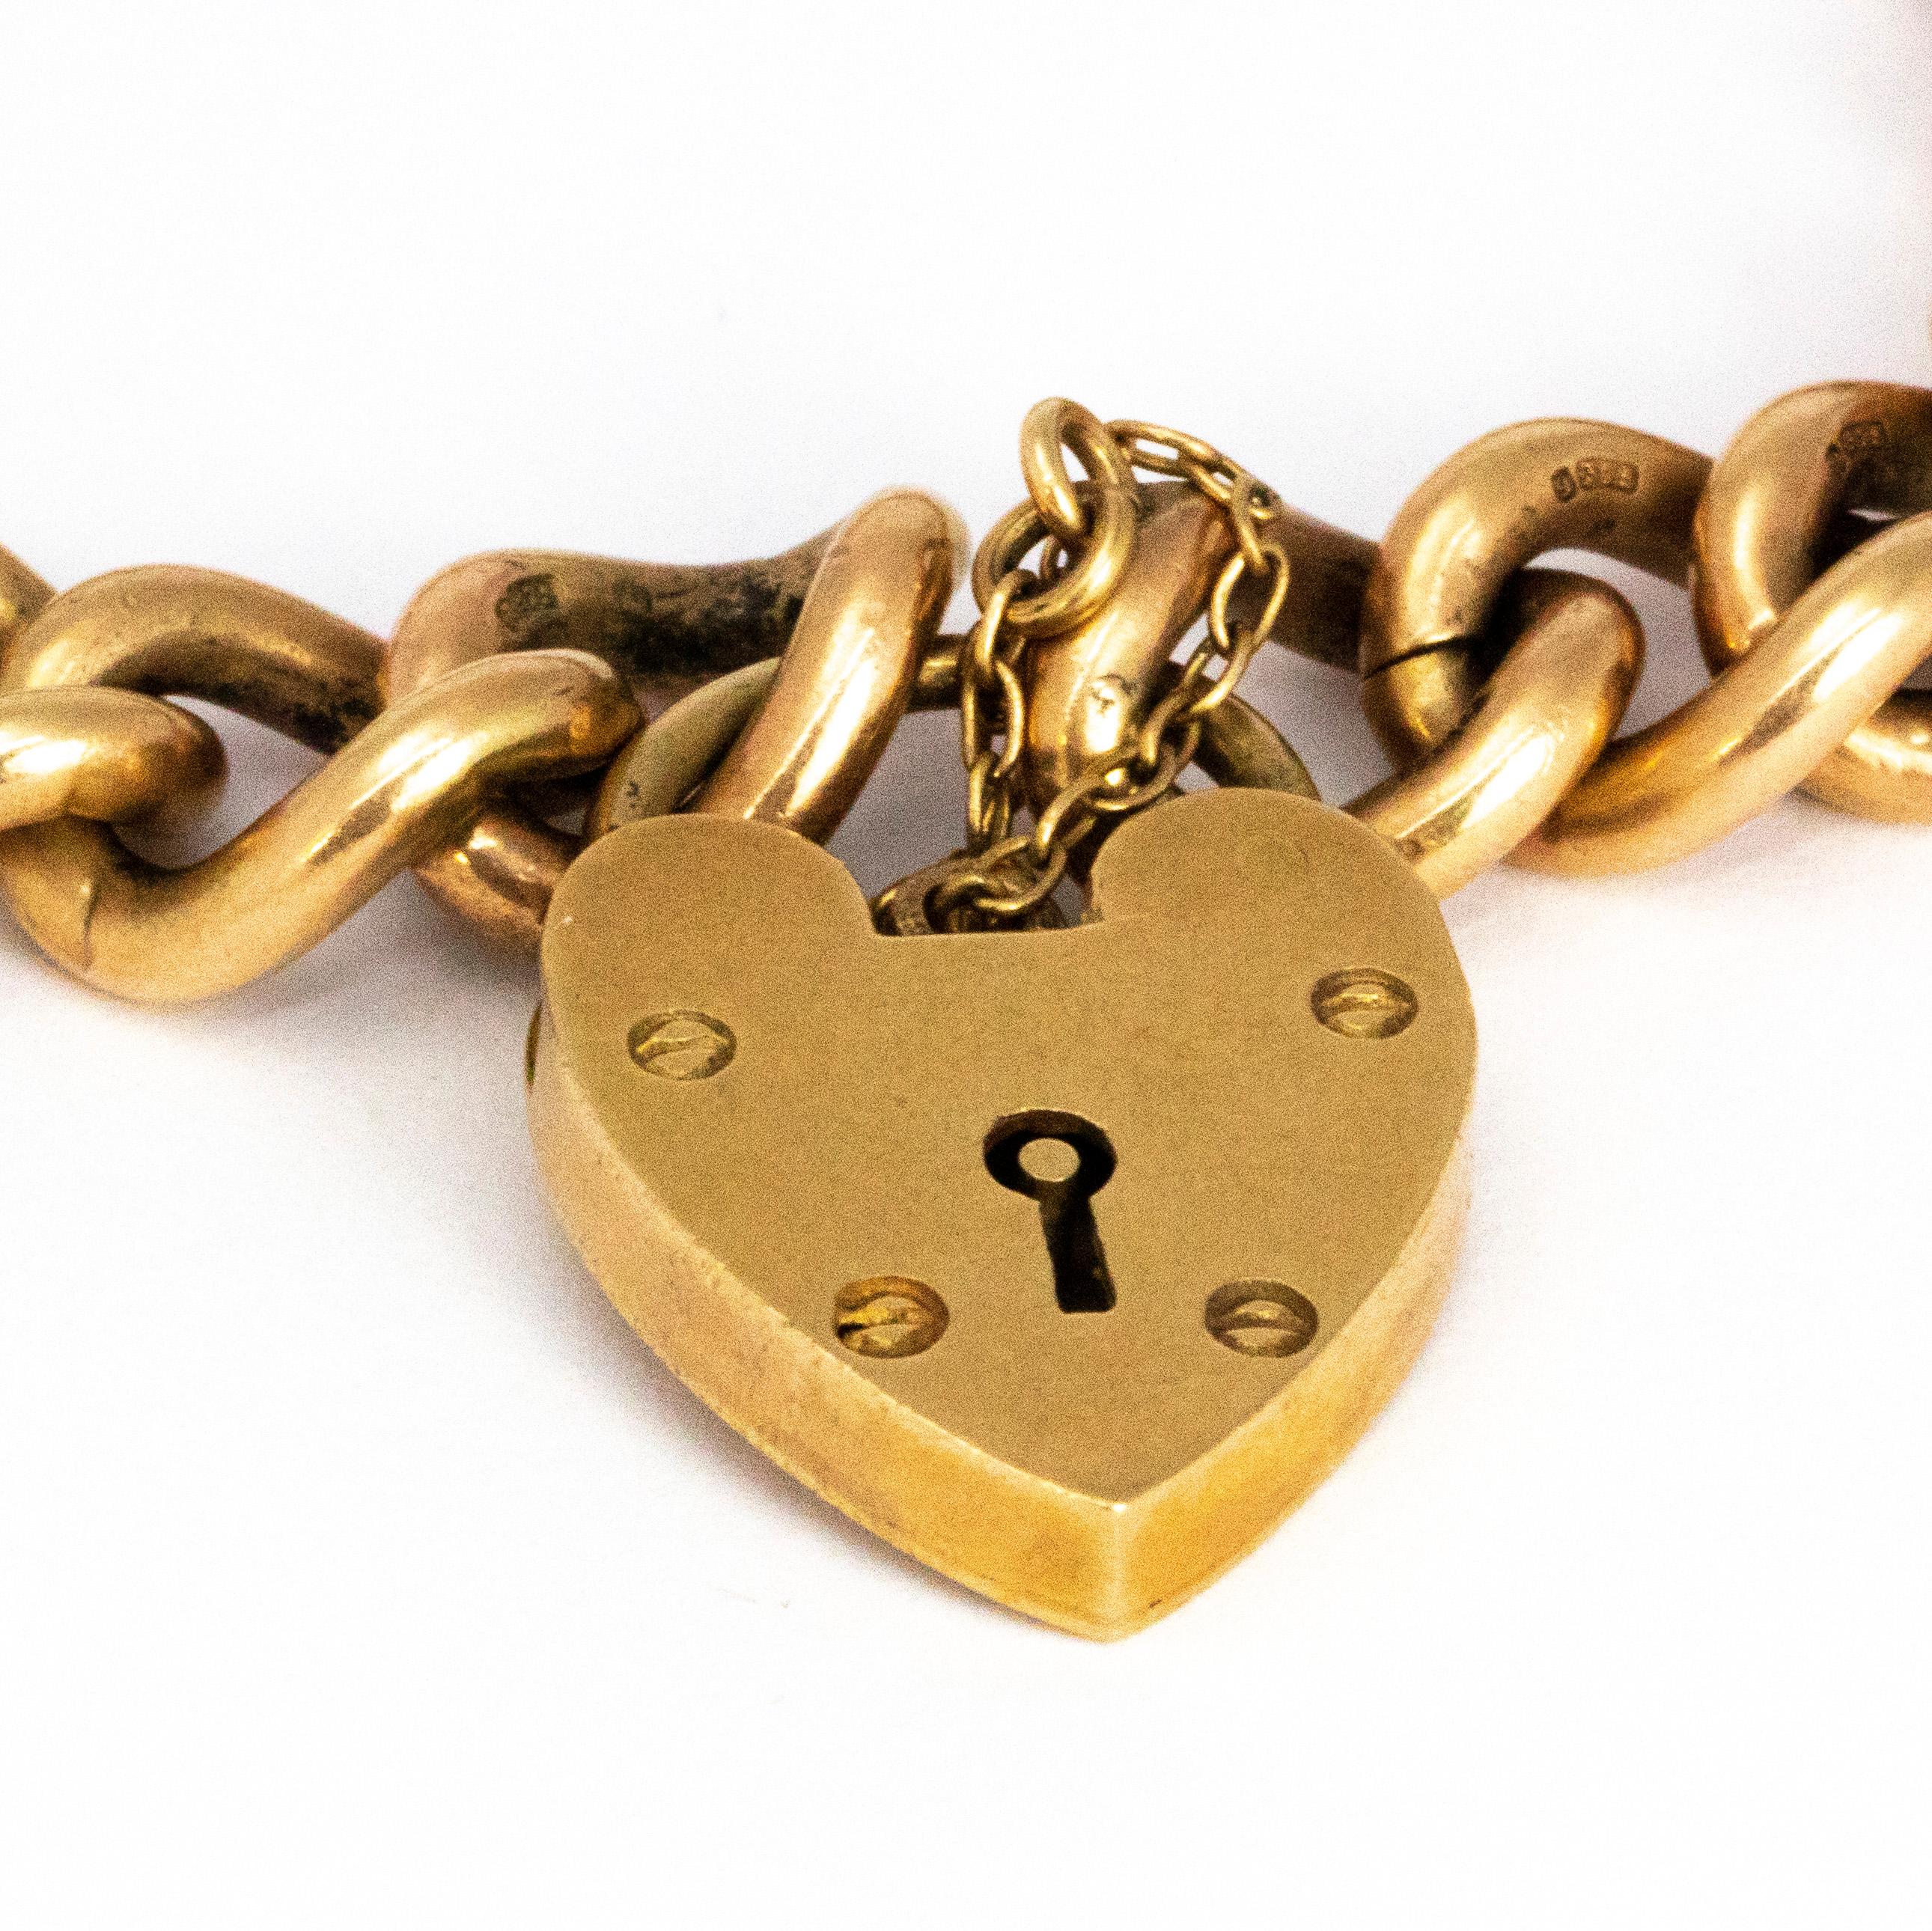 This bracelet has a very classic style and is modelled in 9ct gold. The bracelet is fastened by a heart padlock. Made in Birmingham, England. 

Length: 18cm 
Chain Width: 85mm